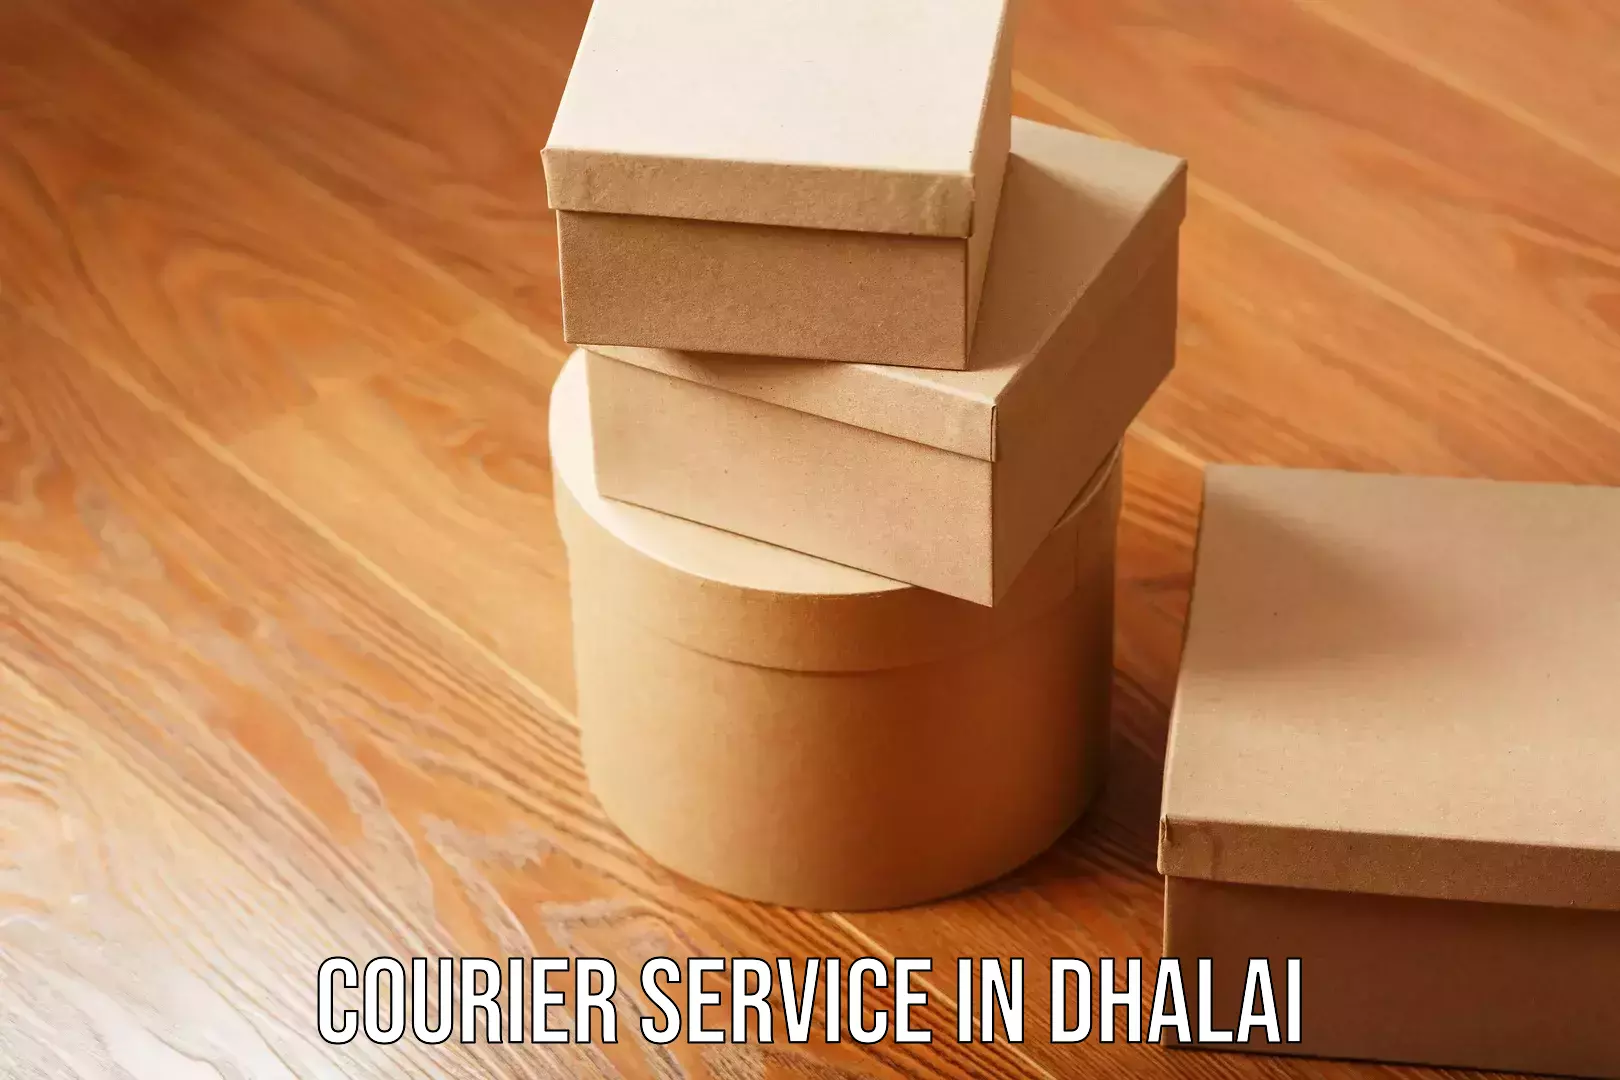 Logistics and distribution in Dhalai